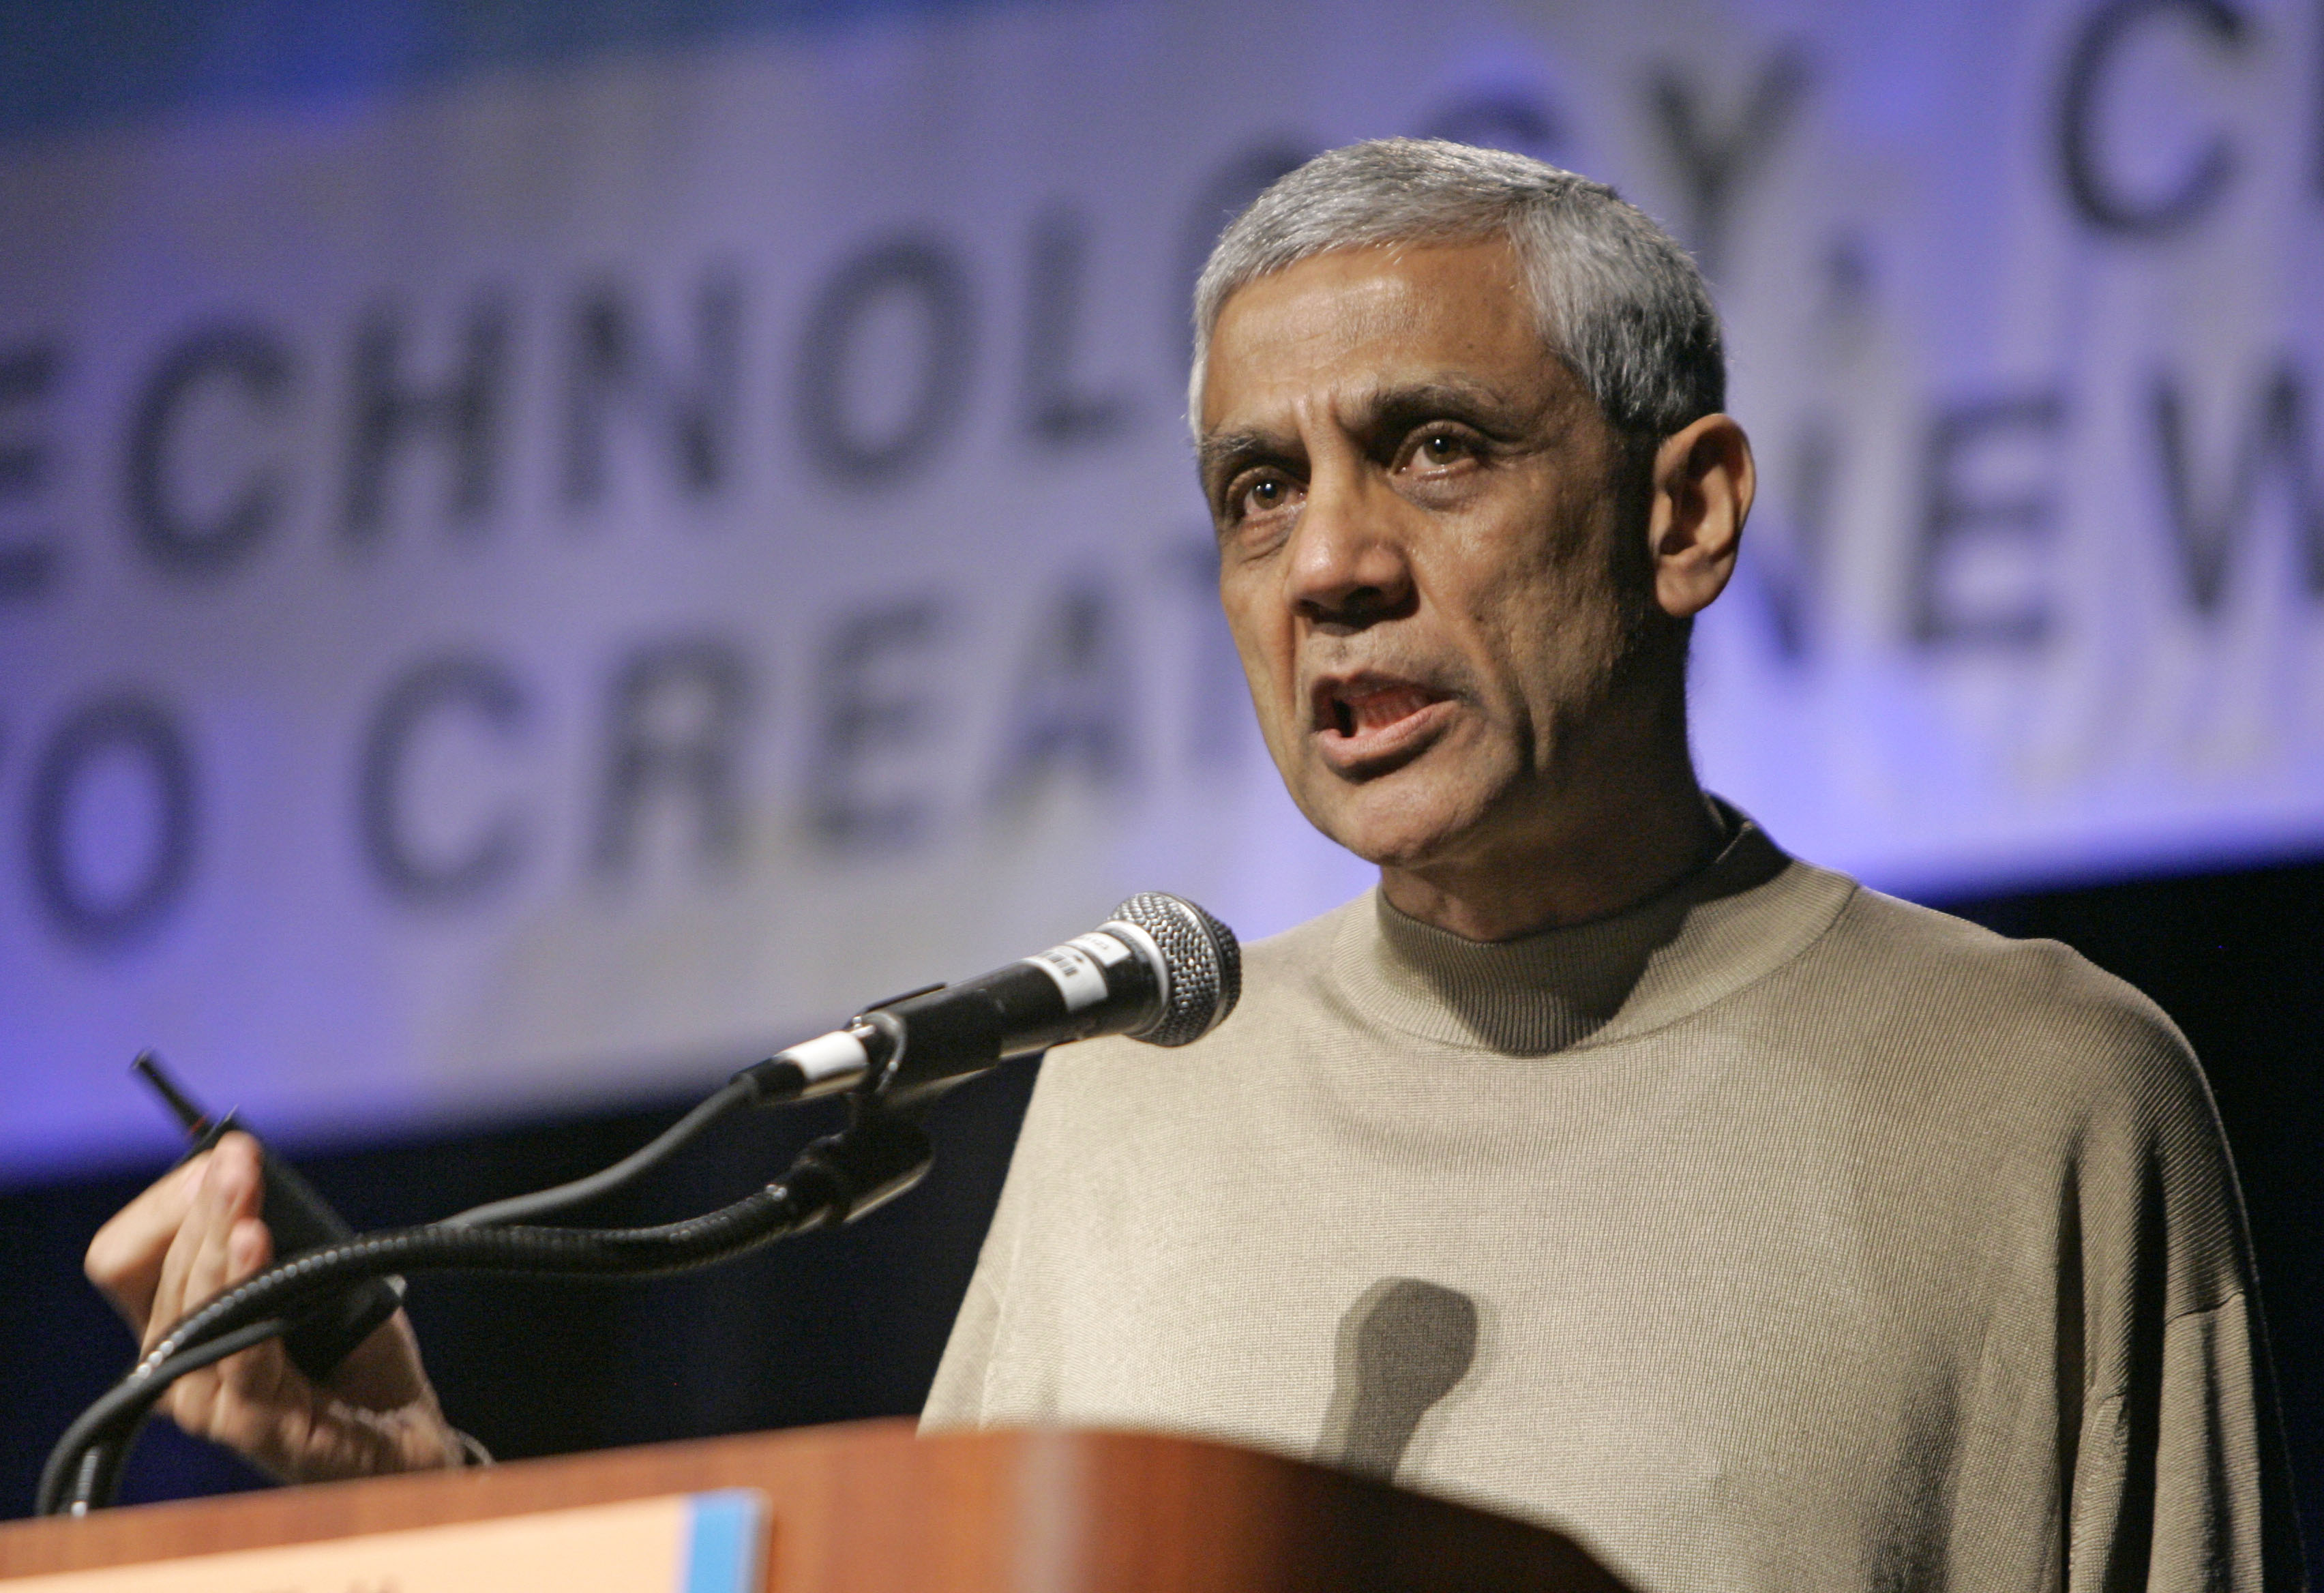 "Vinod Khosla speaks about fuels of the future at a Bio Tech conference in Lake Buena Vista, Fla., Wednesday, March 21, 2007."